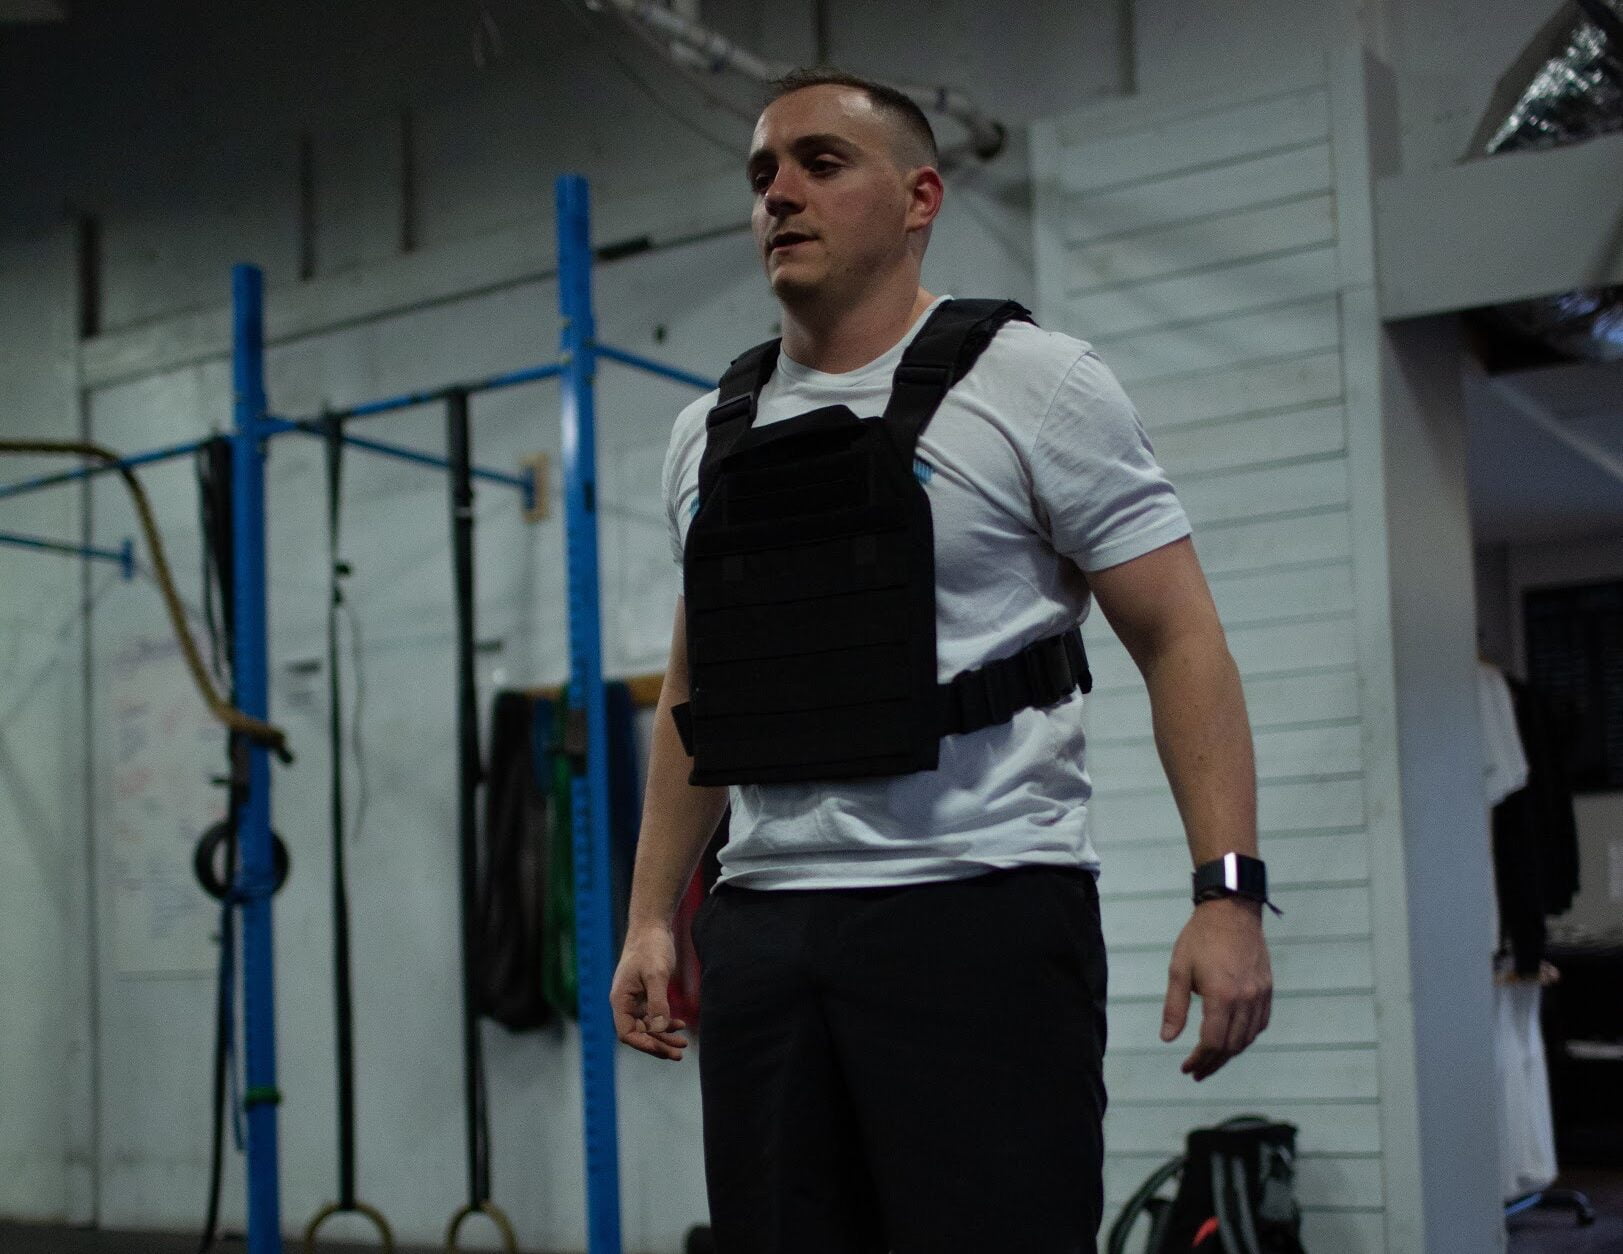 TacTec Trainer Weight Vest - Optimize Your Workouts